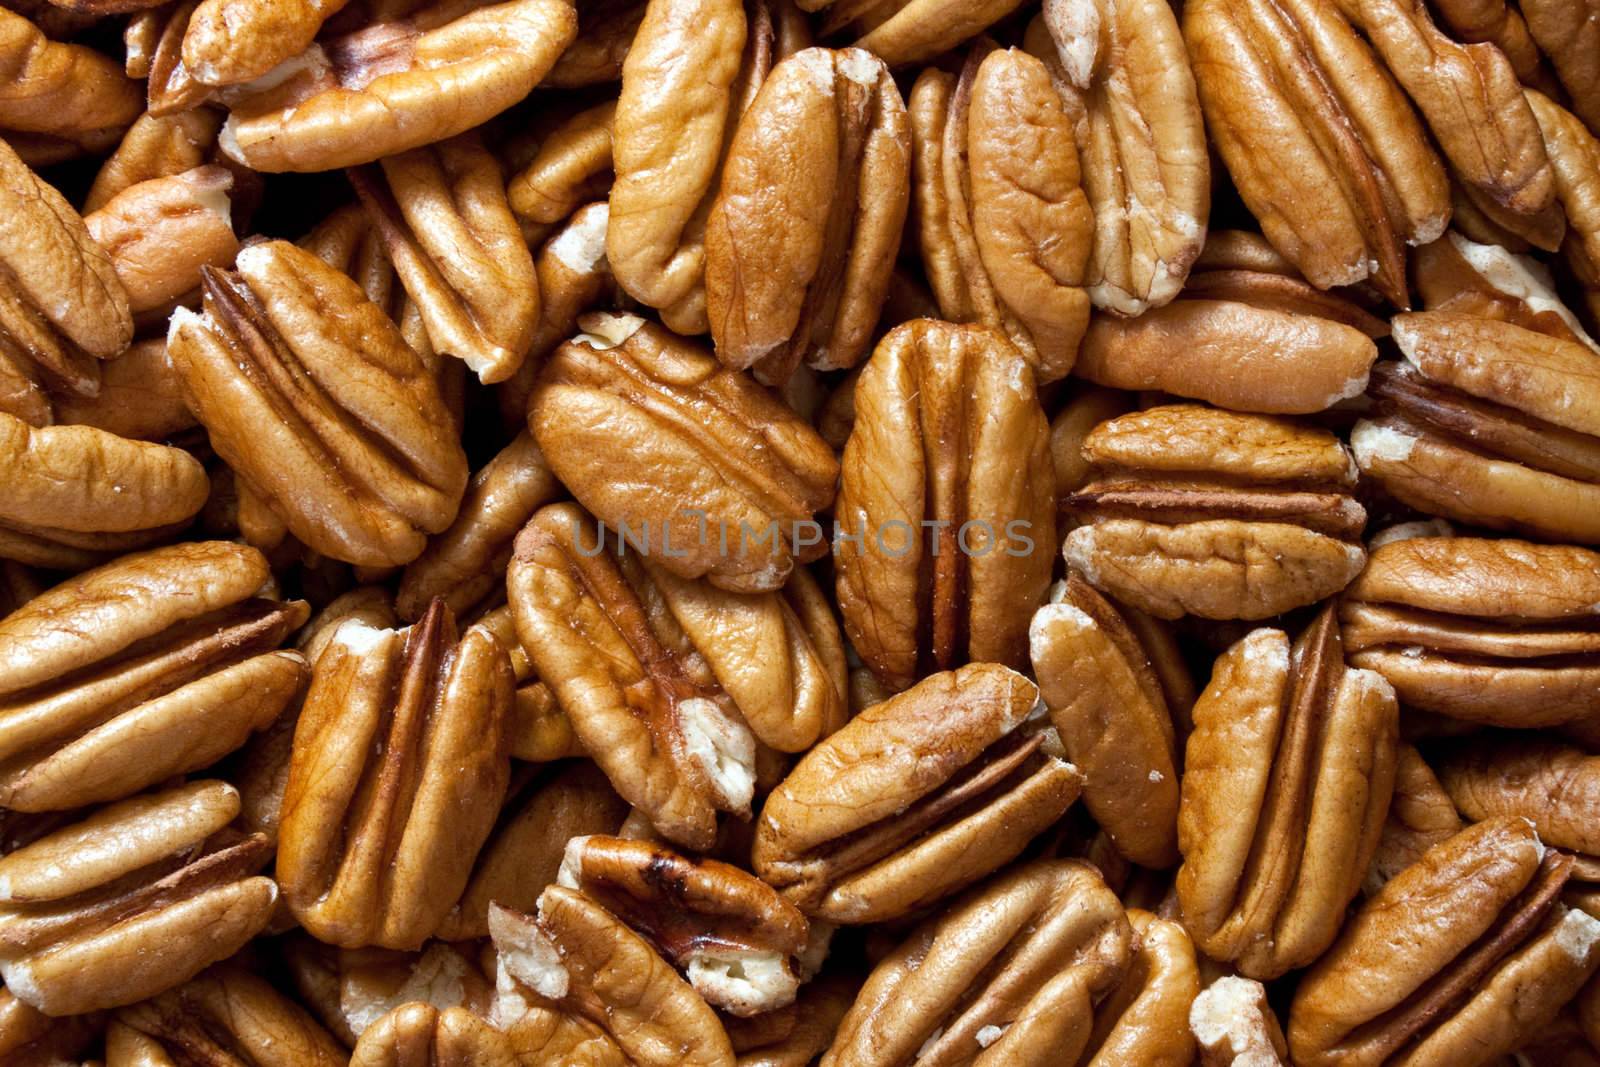 Pecan nuts  by raliand